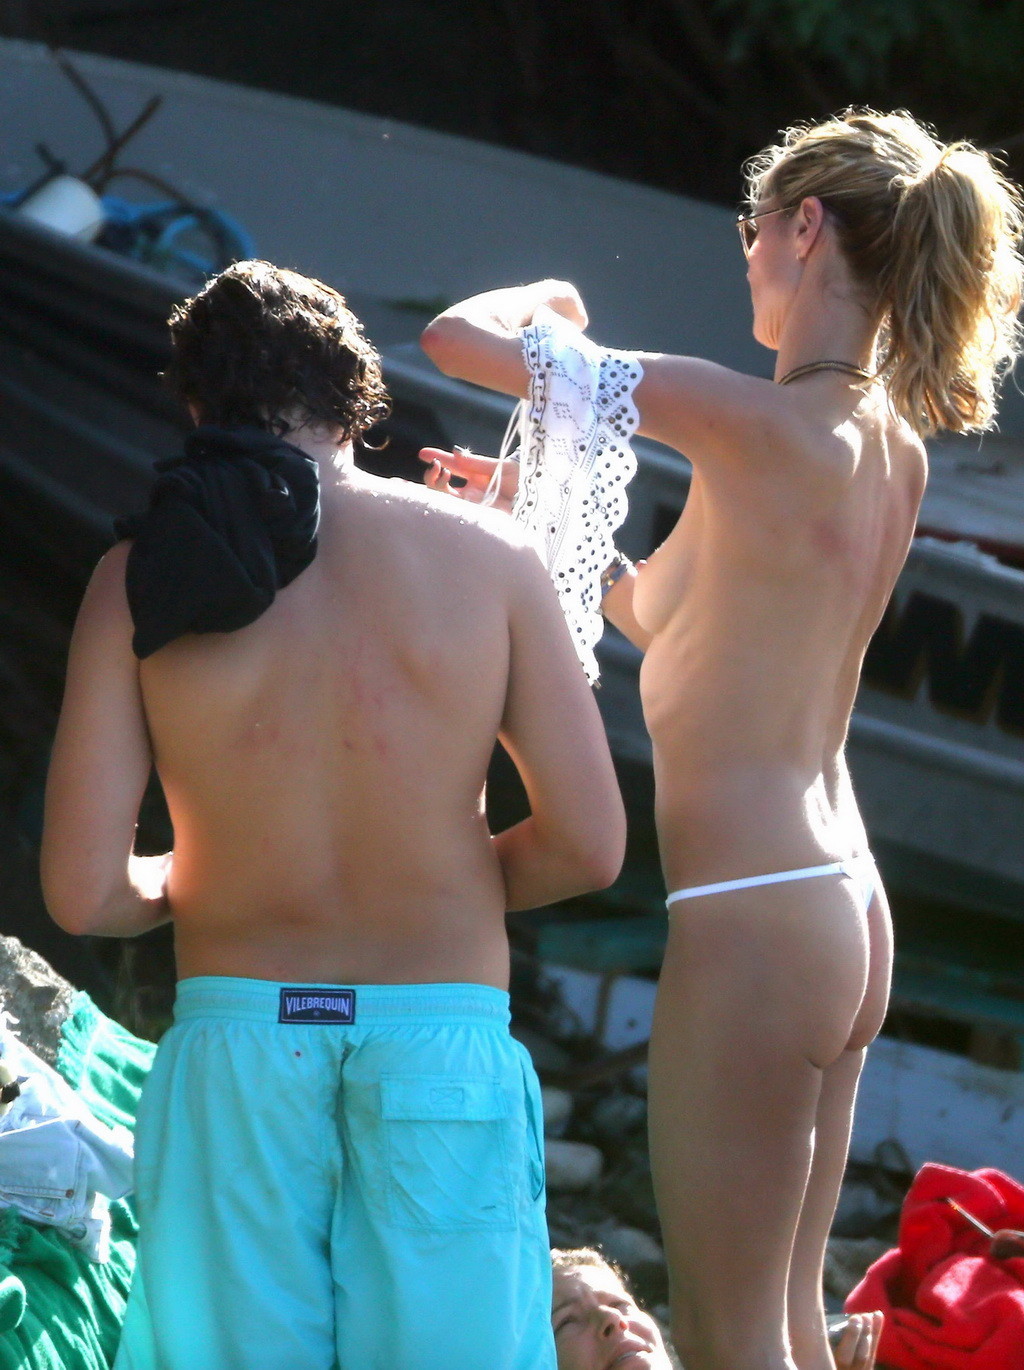 Heidi Klum caught topless in a white thong during a vacation in StBarts #75177327